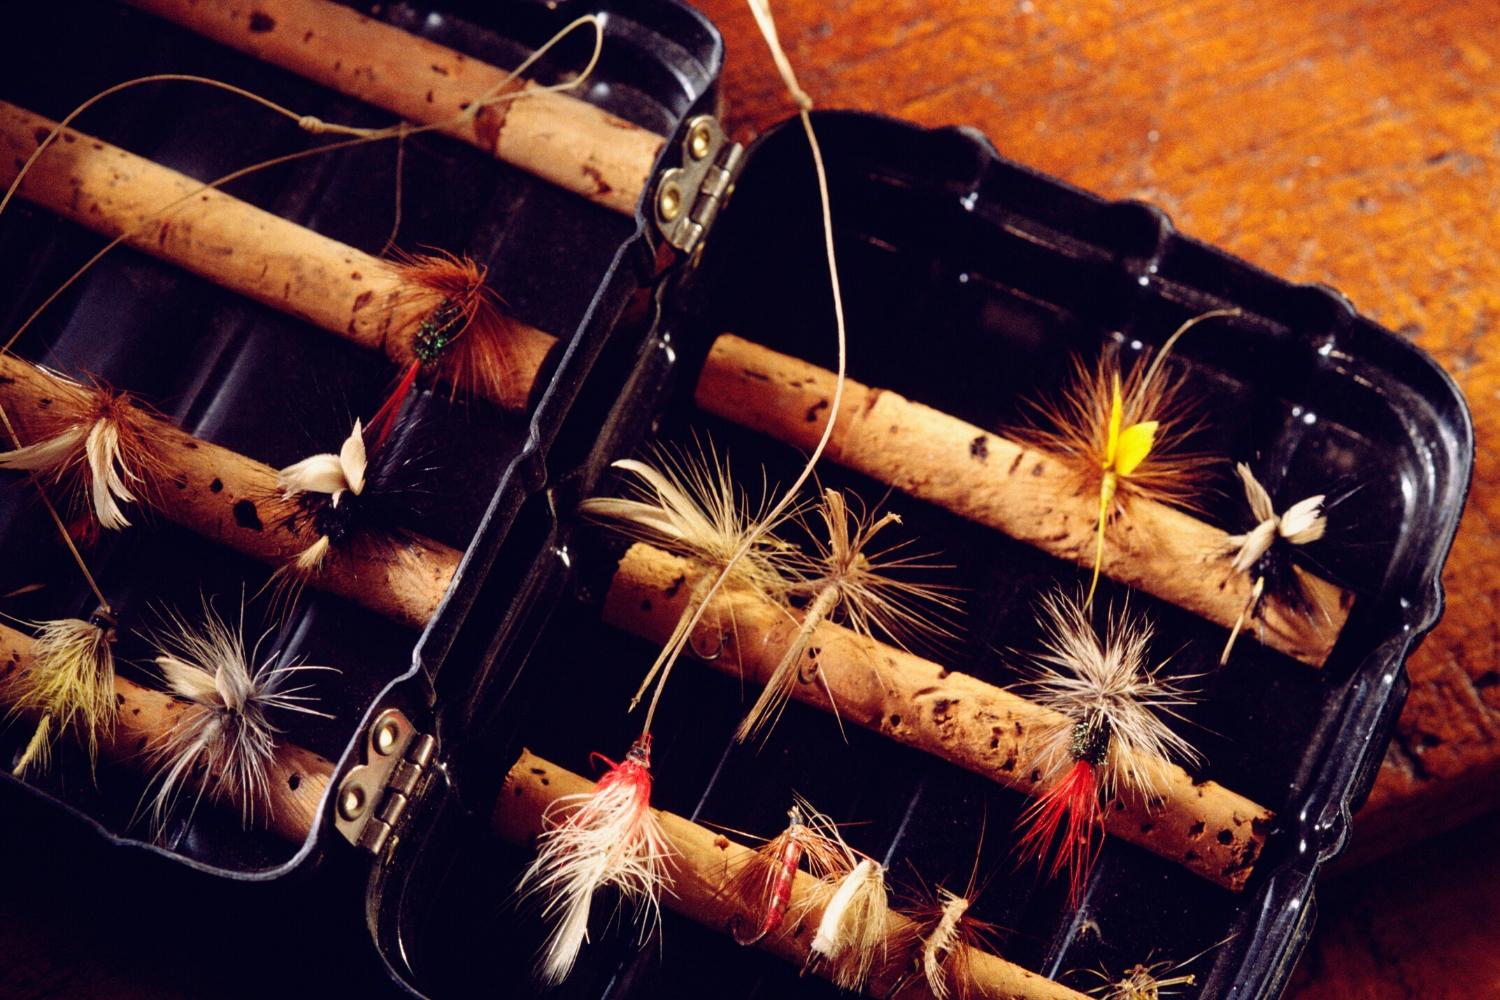 https://flyfishingfix.com/wp-content/uploads/2020/02/How-To-Keep-Your-Dry-Flies-From-Sinking.jpg